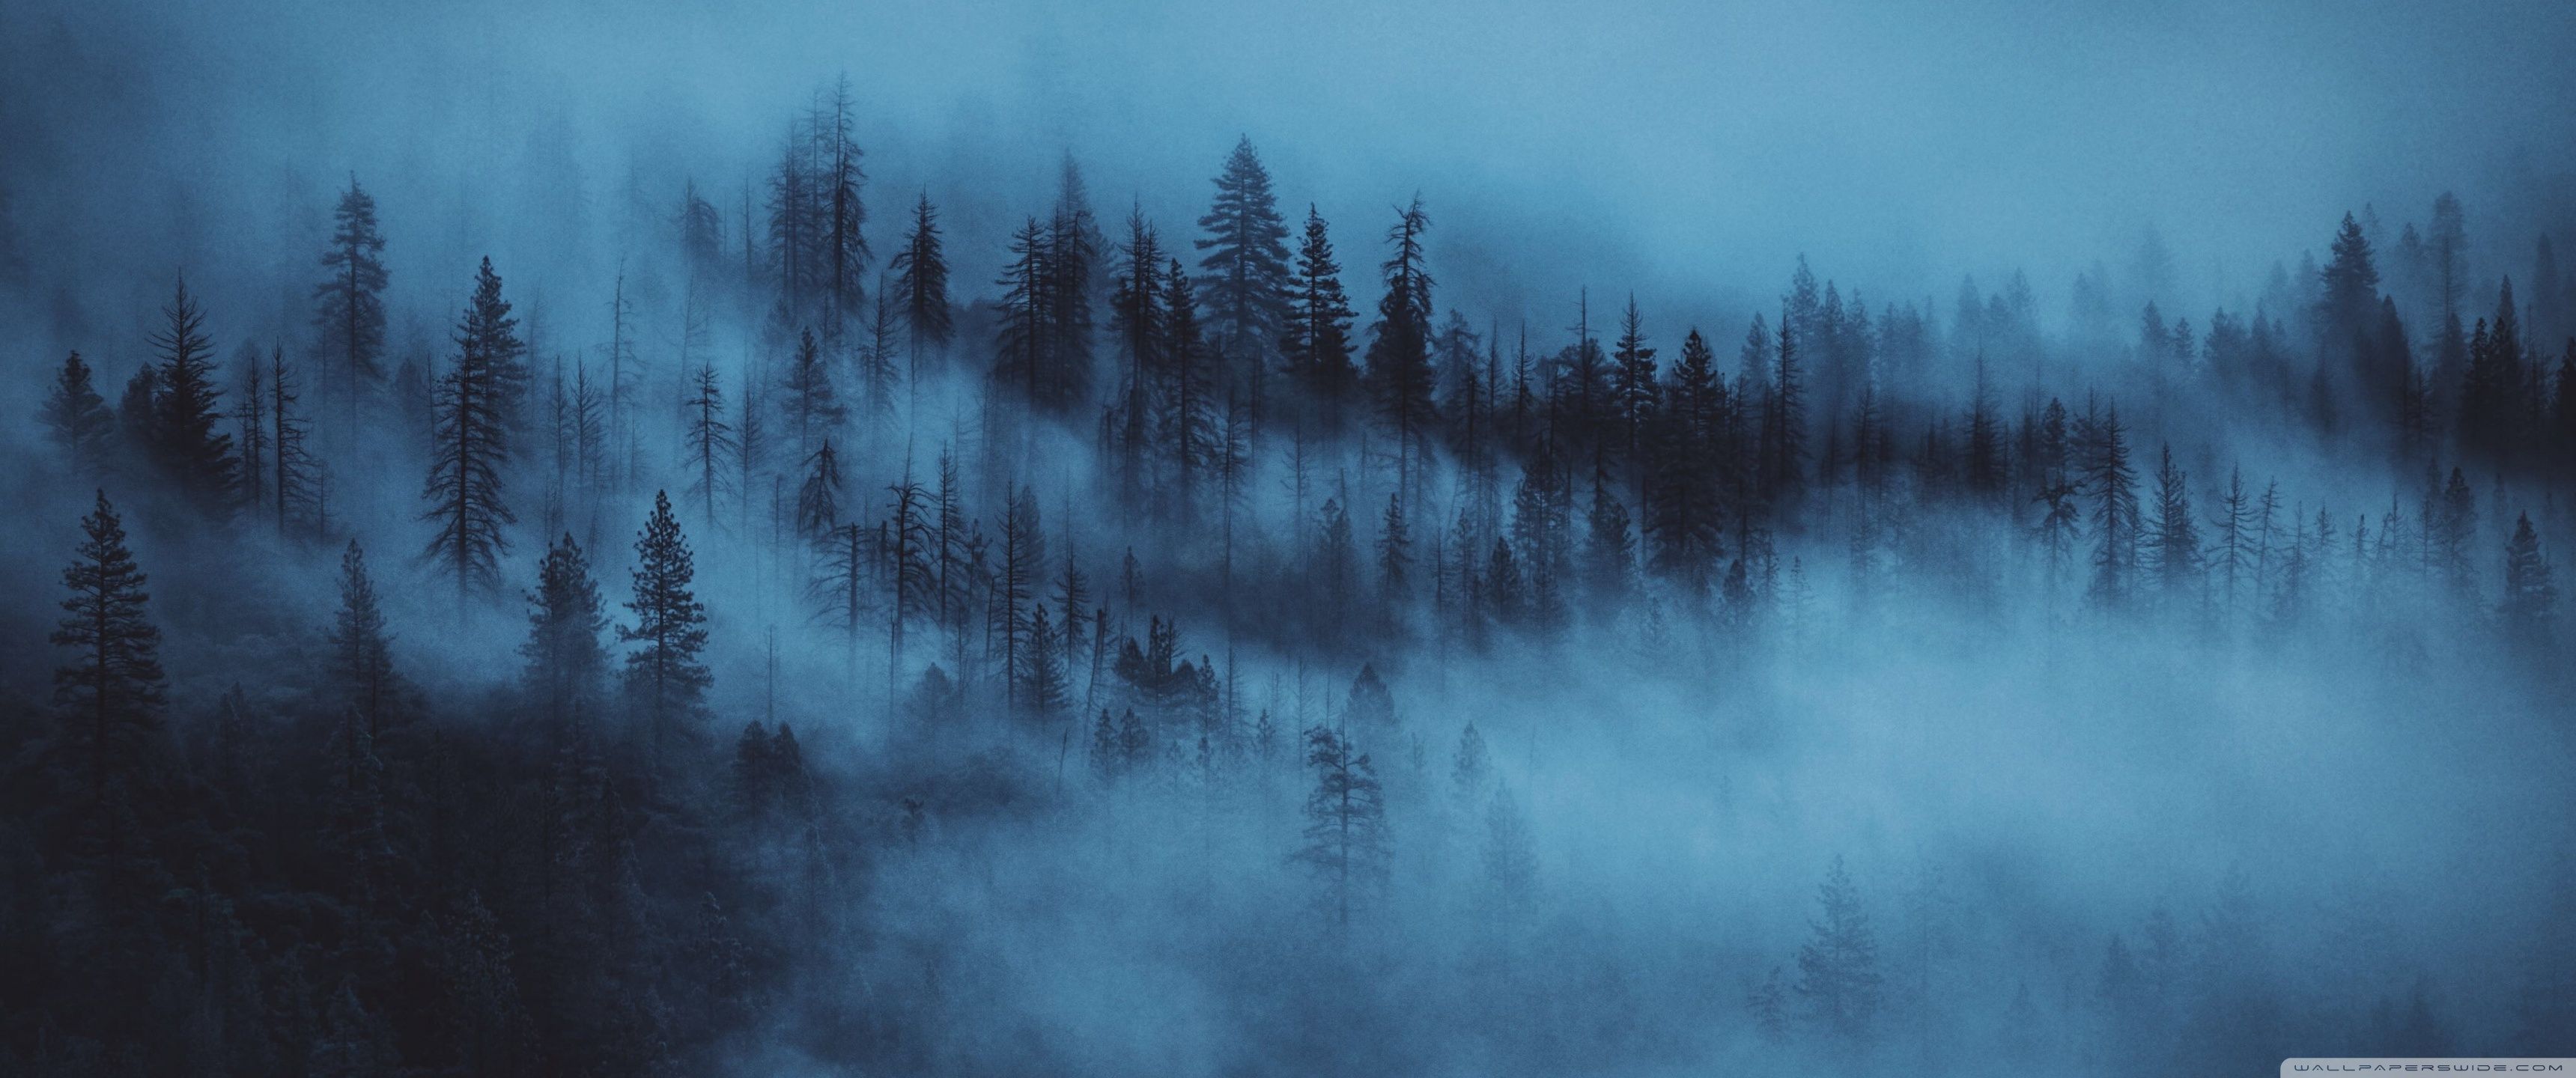 Misty forest in the night wallpaper 2560x1440 - 3440x1440